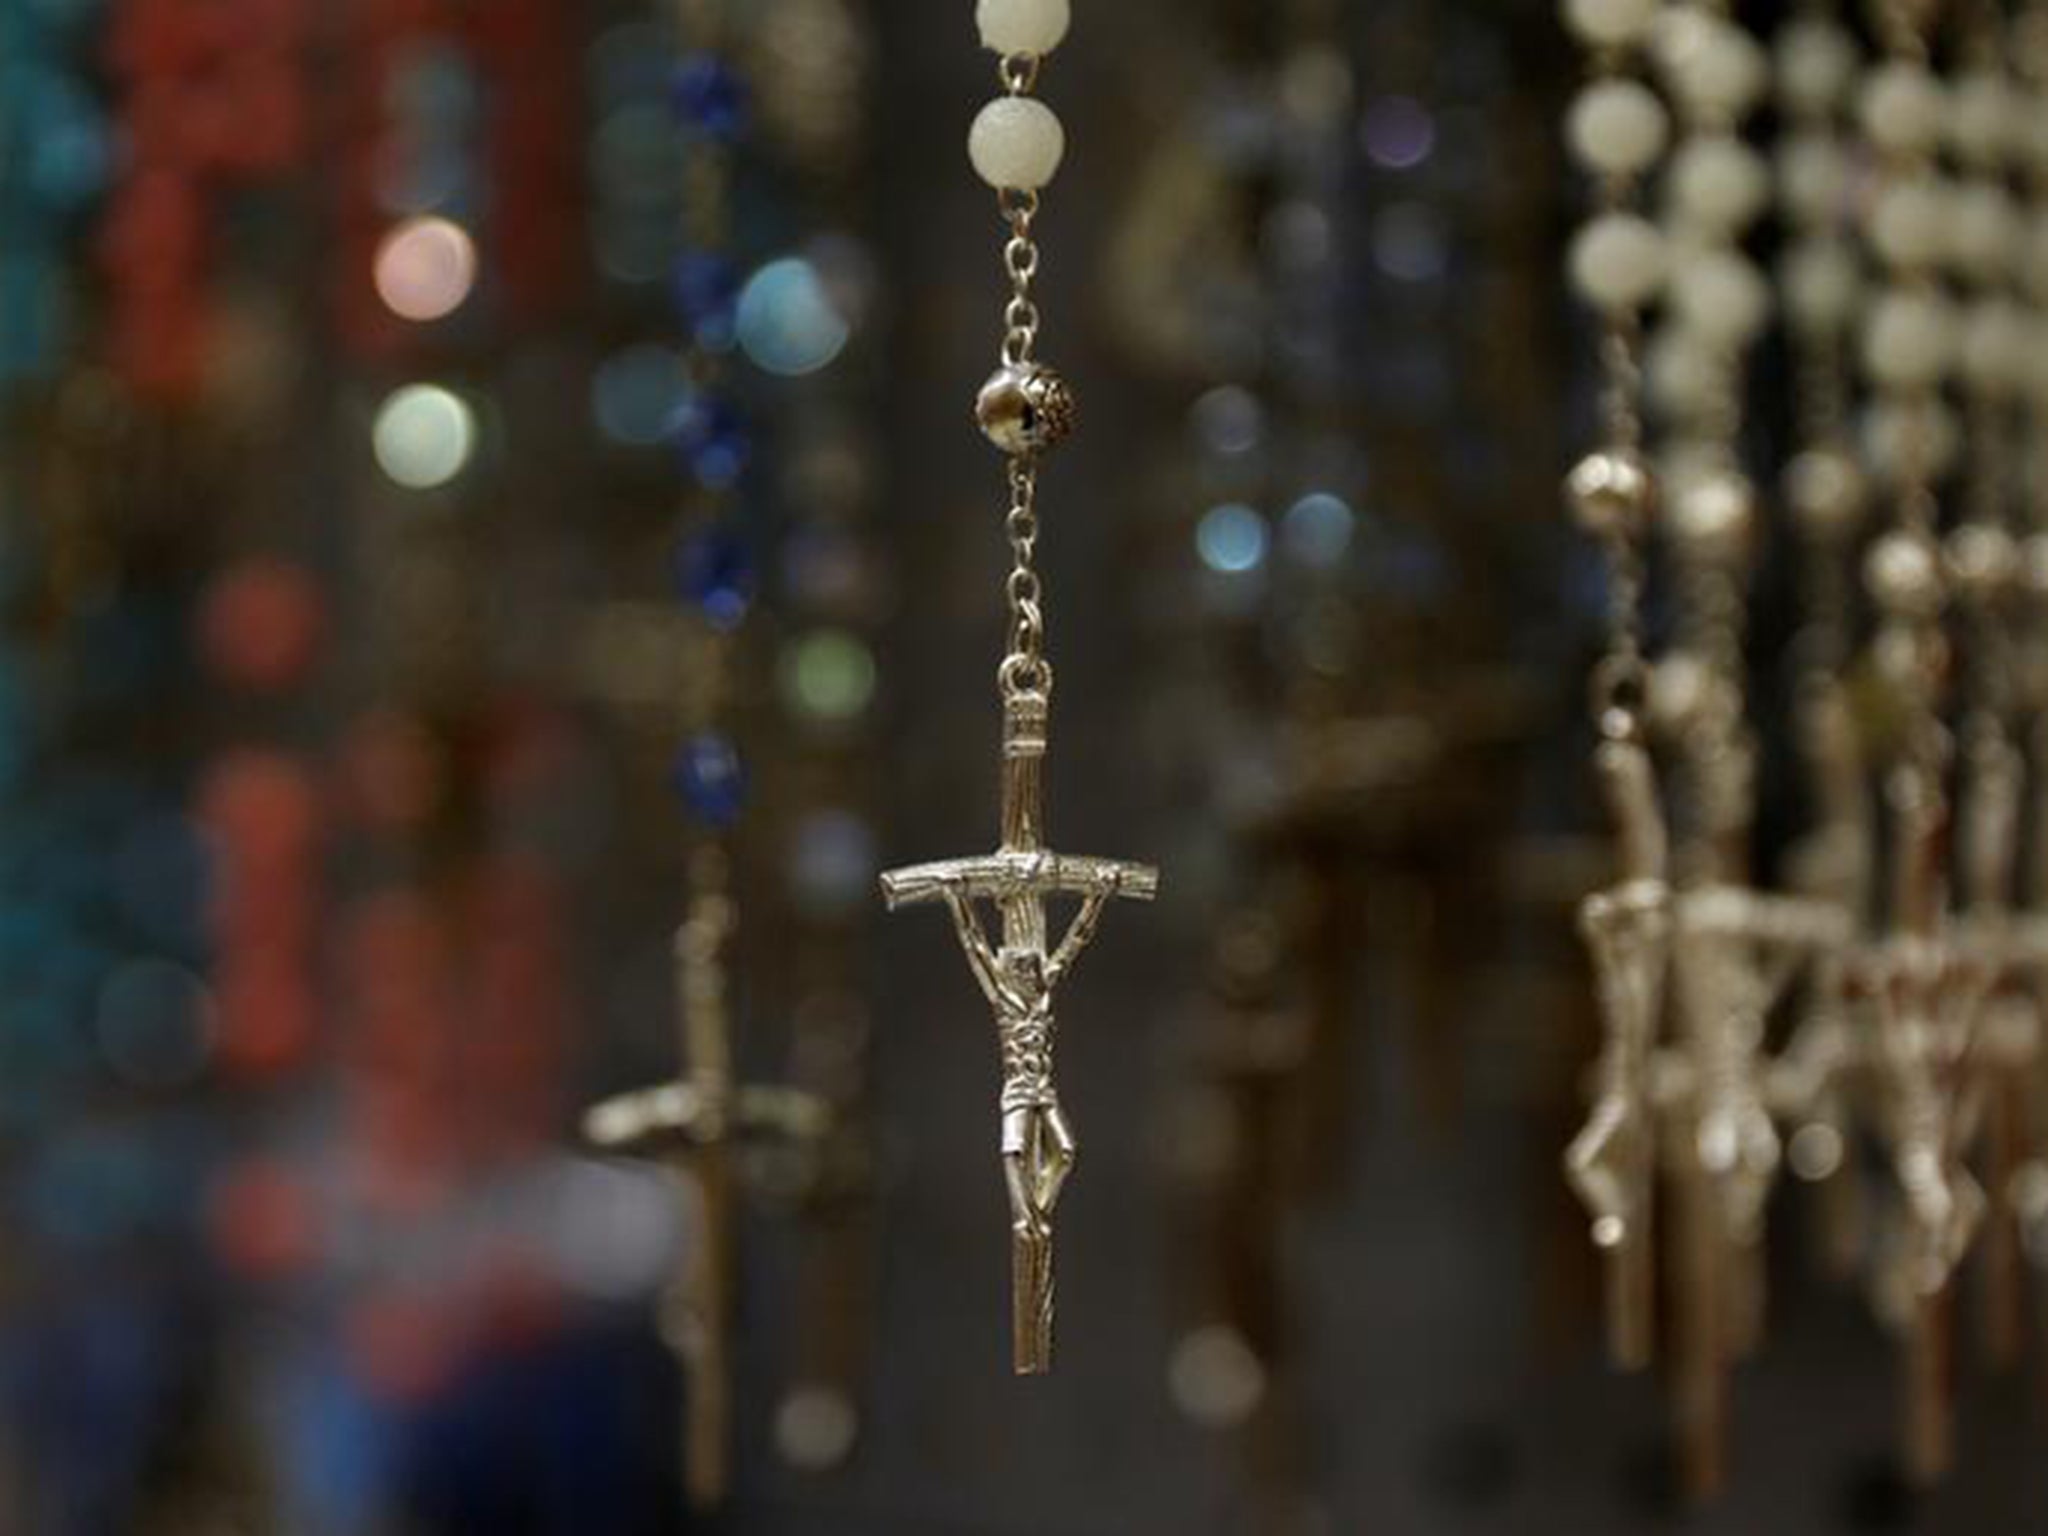 Crosses hang on the end of rosary beads displayed in a shop